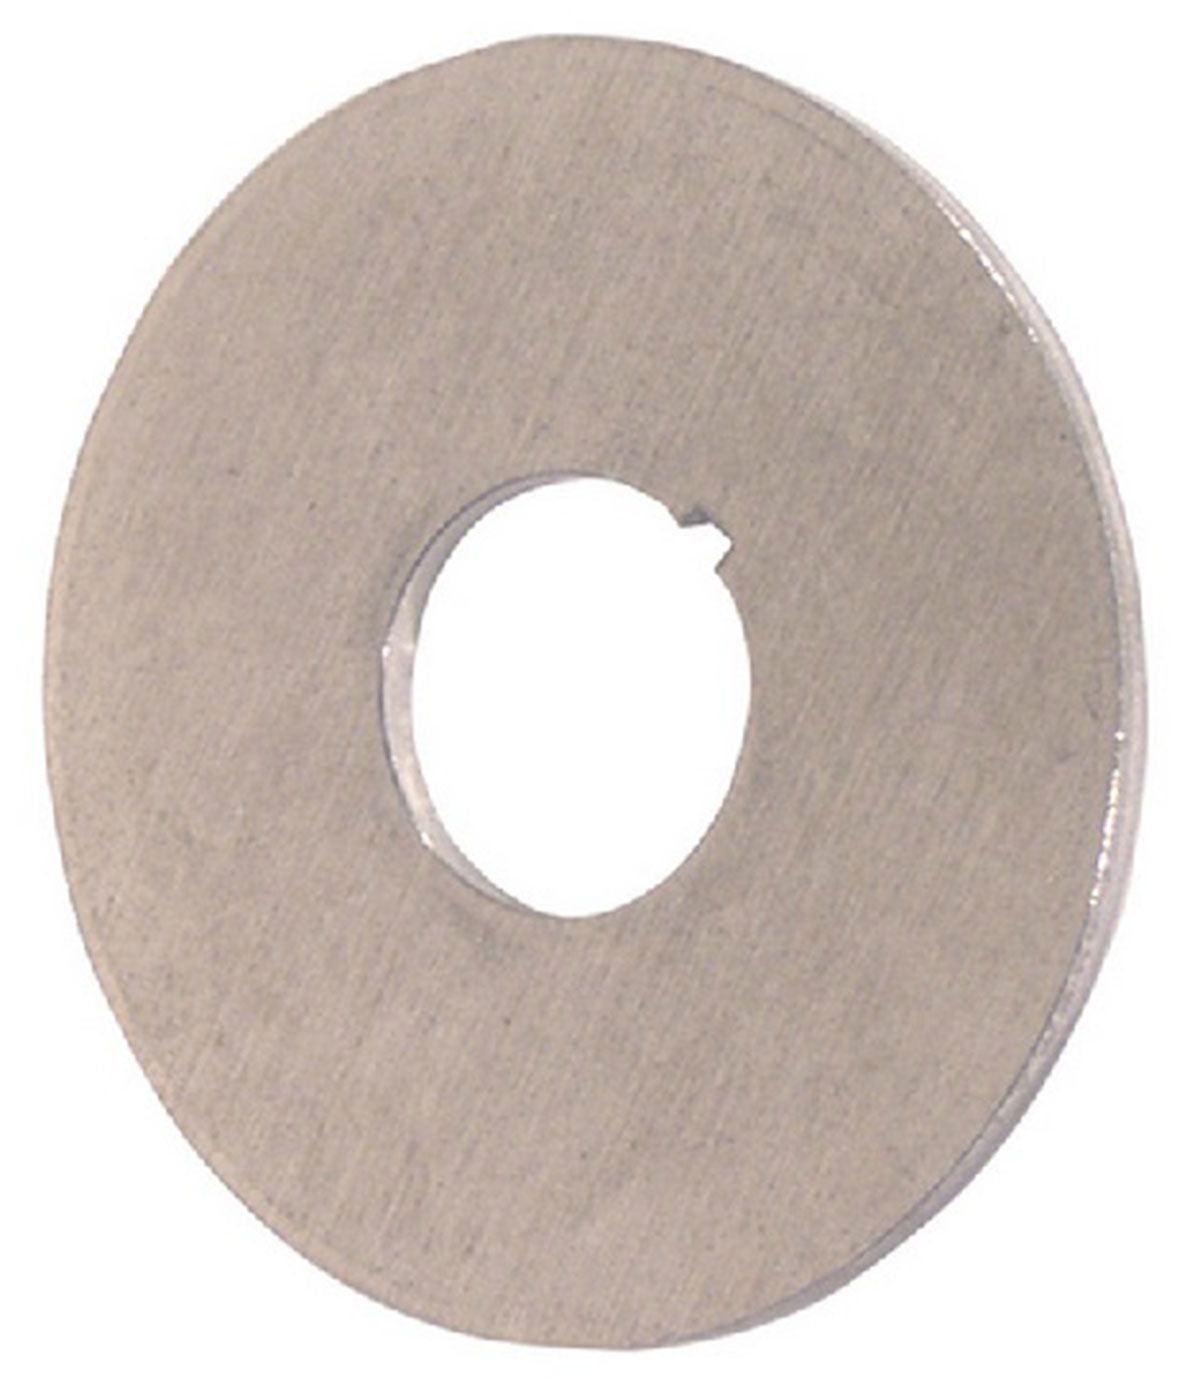 PFS05-0735 - PETERSON MANDREL GUIDE WASHER